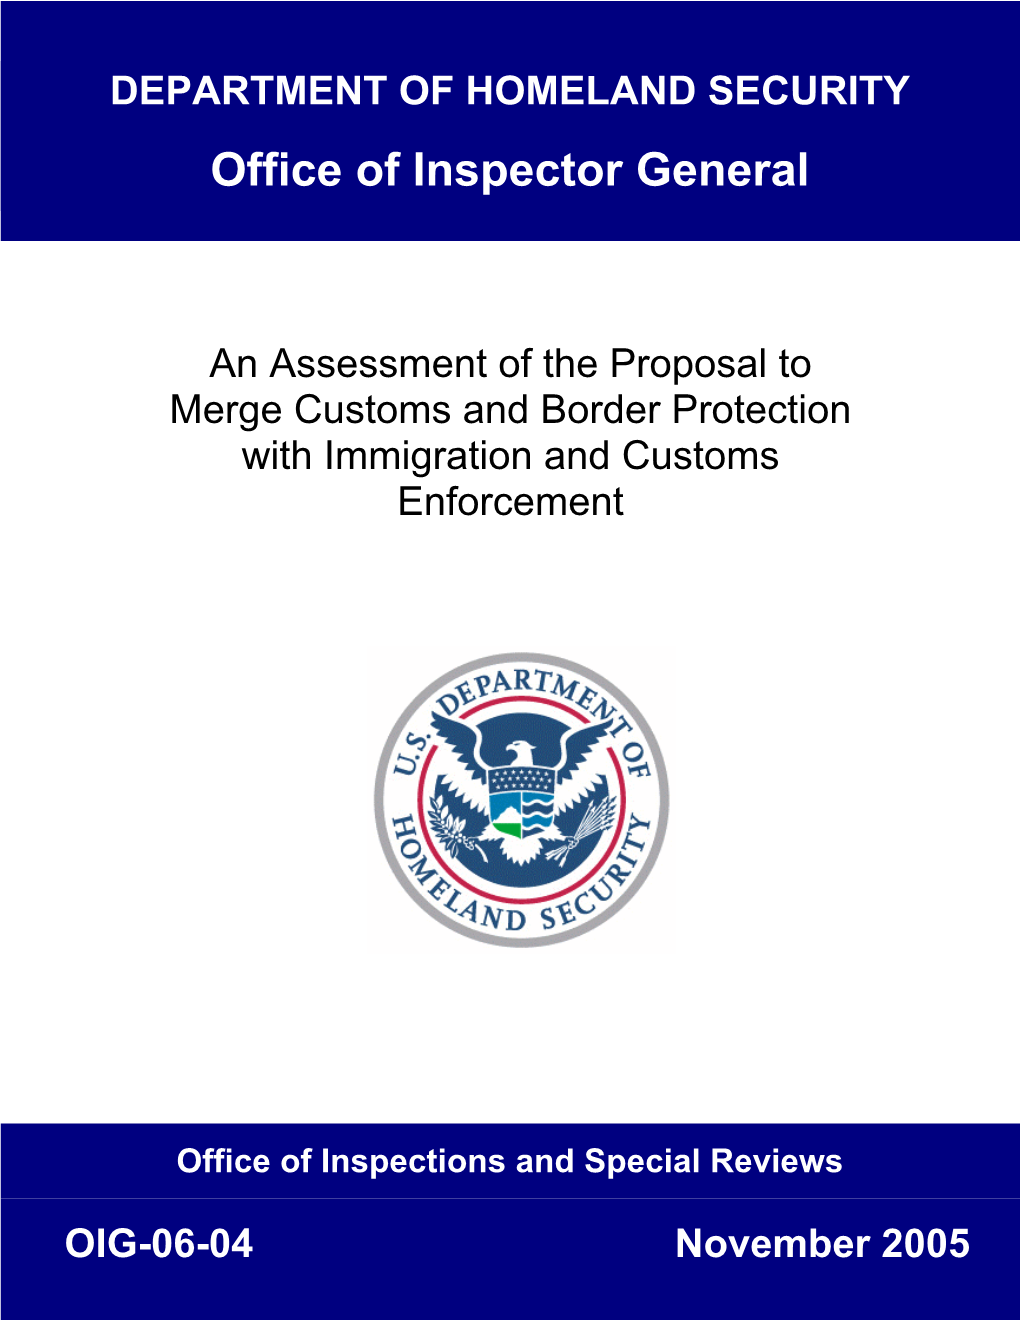 An Assessment of the Proposal to Merge Customs and Border Protection with Immigration and Customs Enforcement